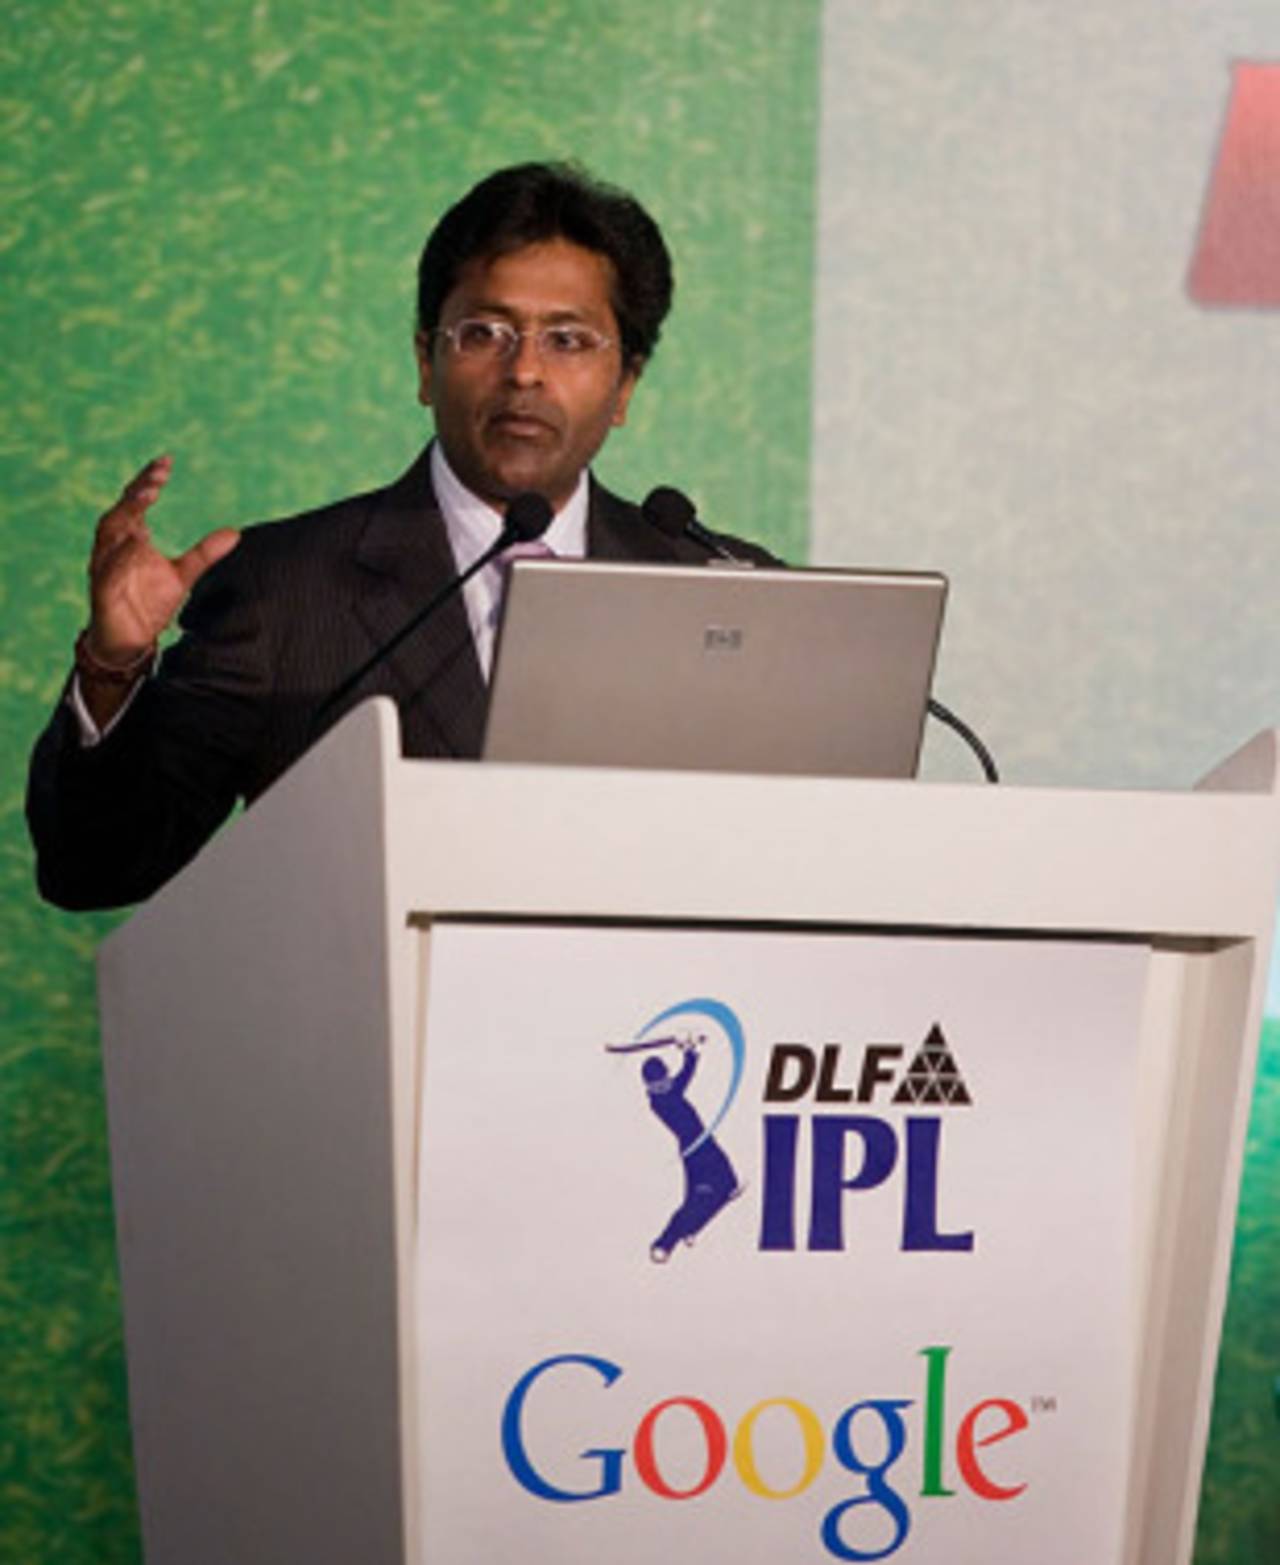 Lalit Modi: "The deal is ideally suited to the British passion for both cricket and entertainment."&nbsp;&nbsp;&bull;&nbsp;&nbsp;Indian Premier League